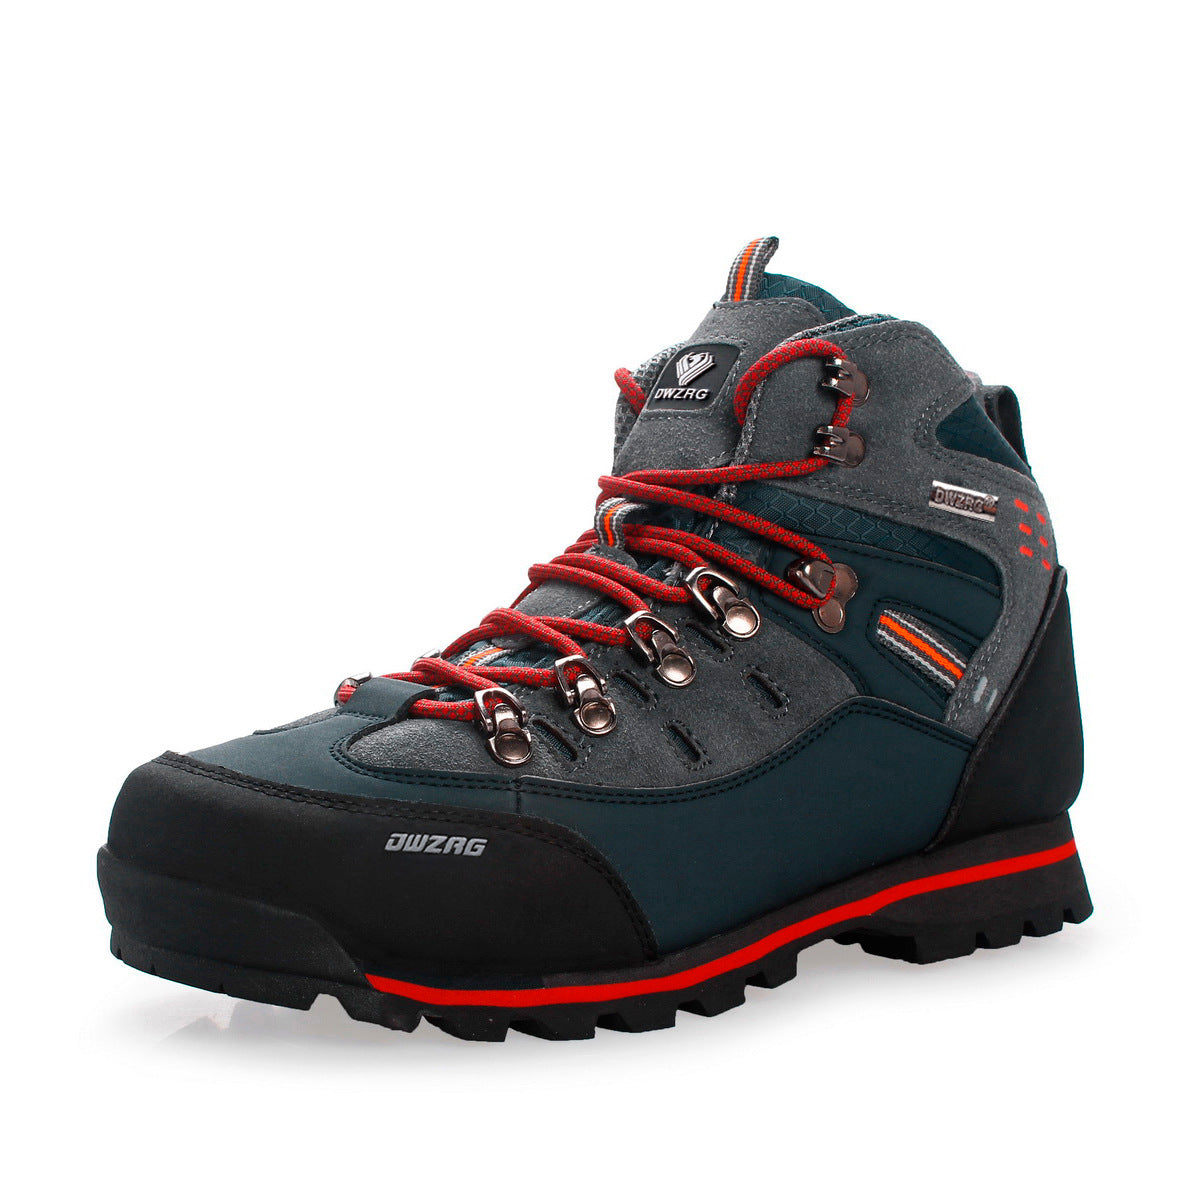 Tiosebon Men's Outdoor Hiking Travel Shoes-Red